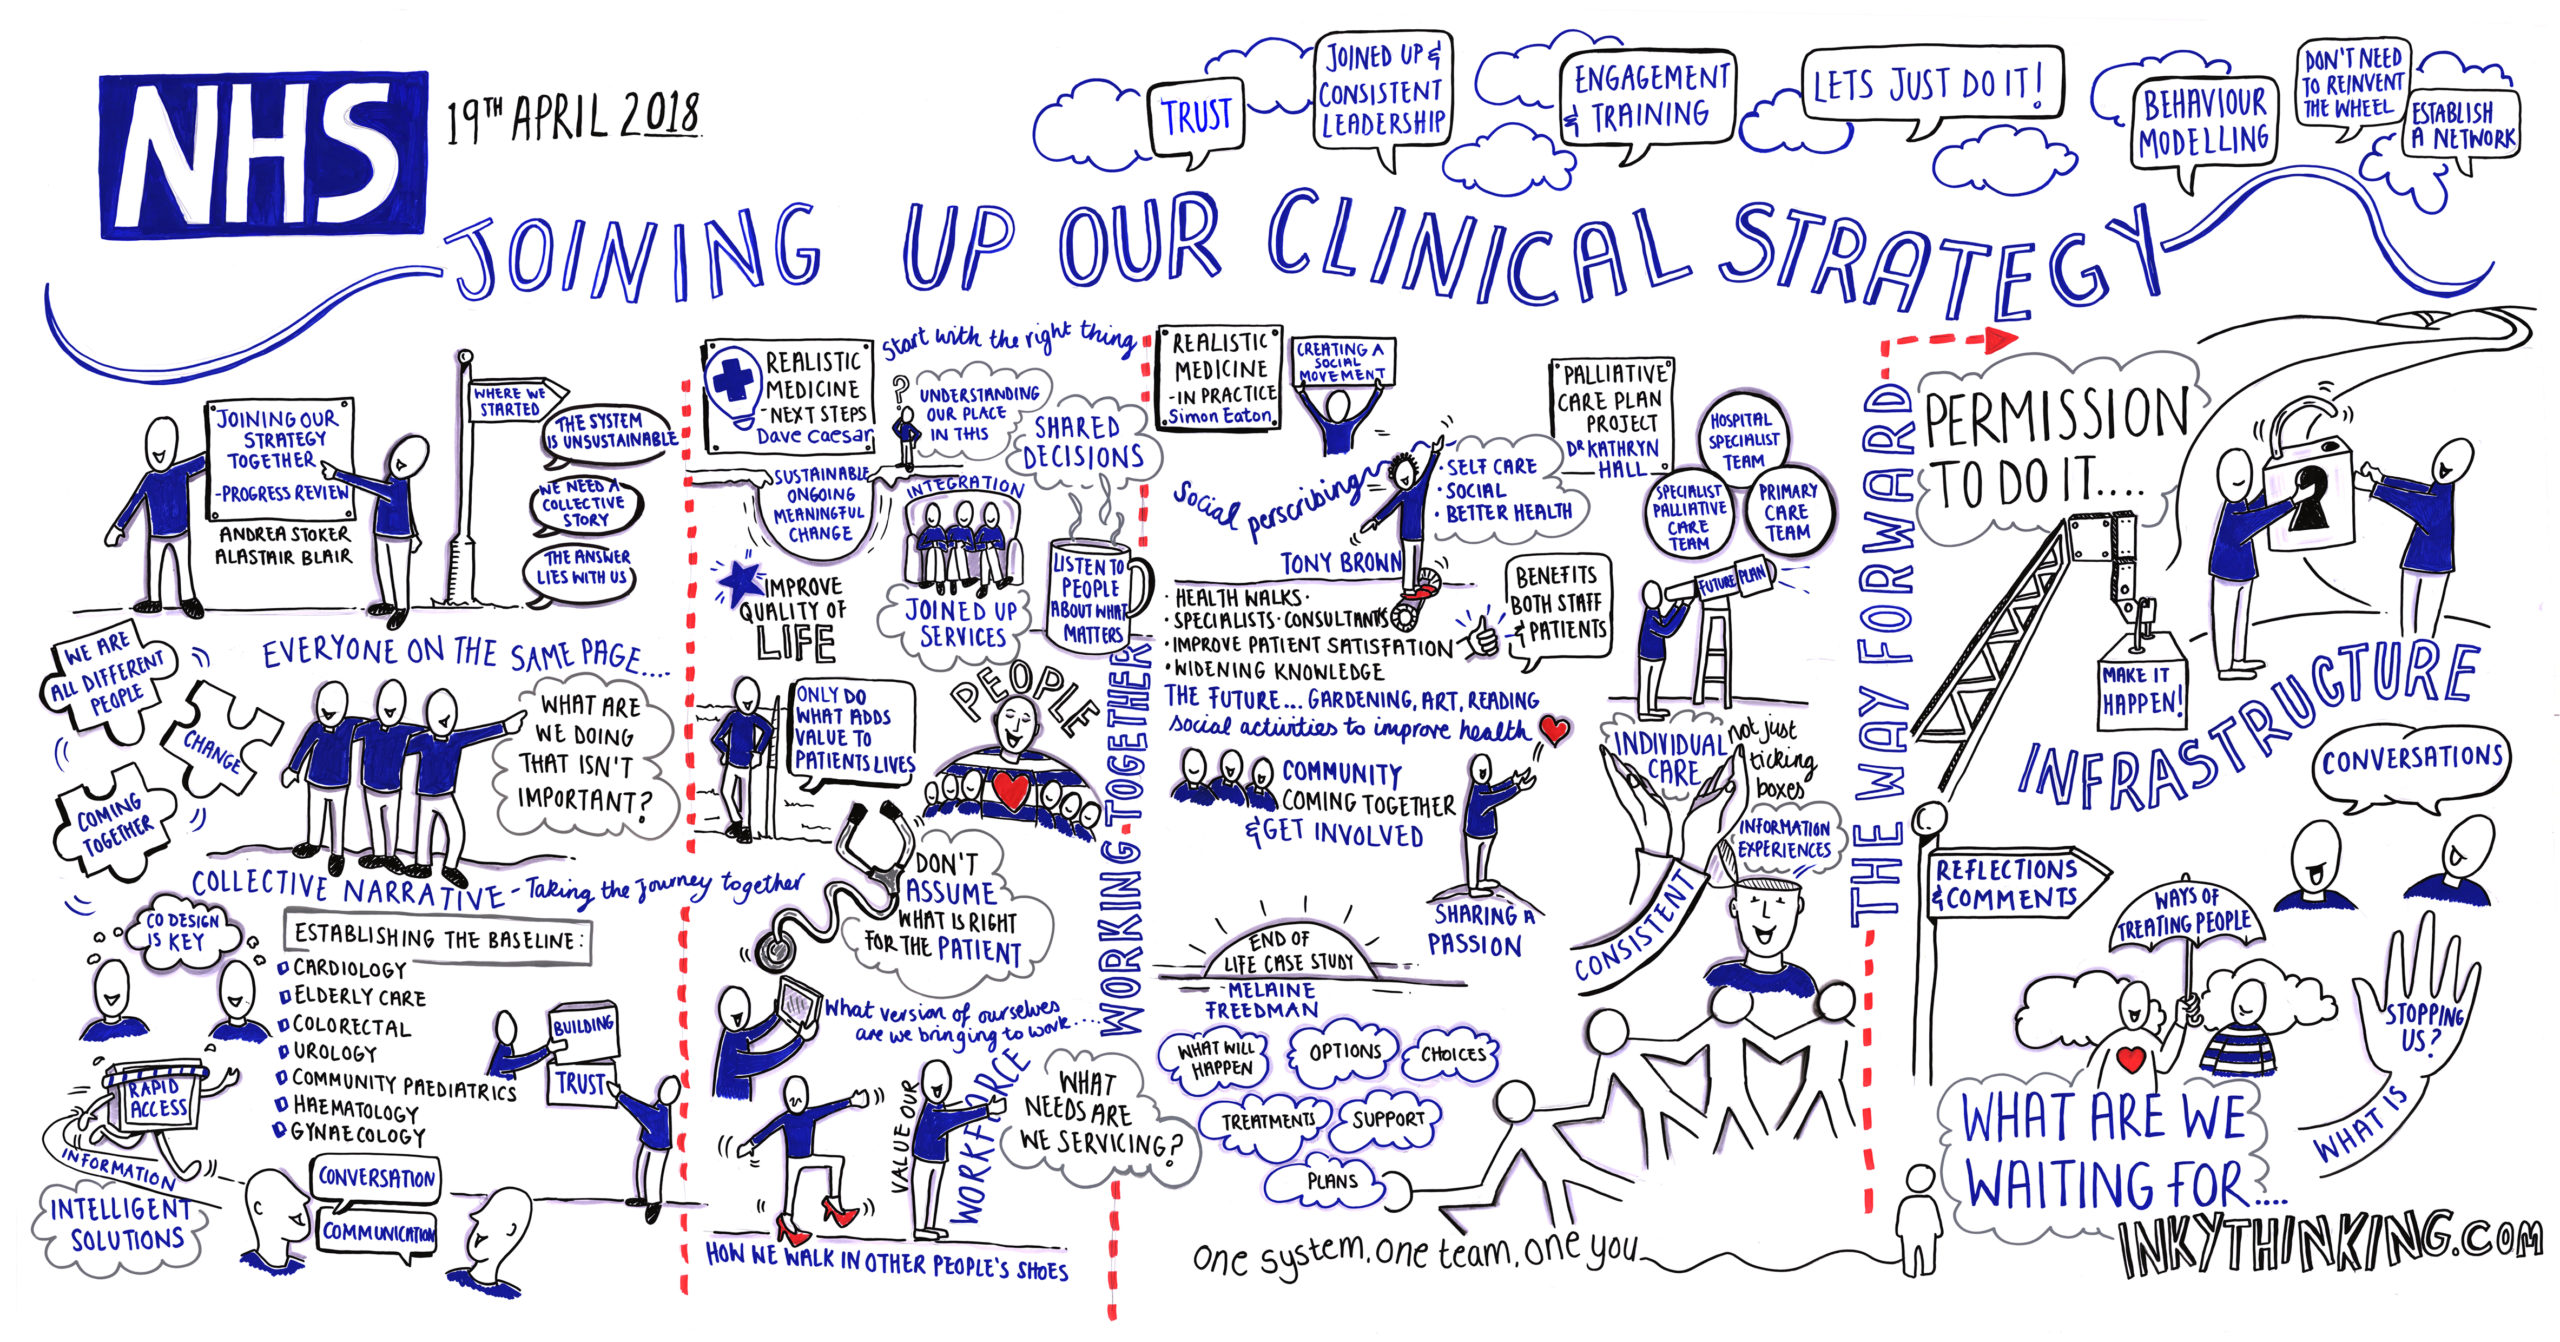 NHS Northumbria Clinical Strategy April 2018